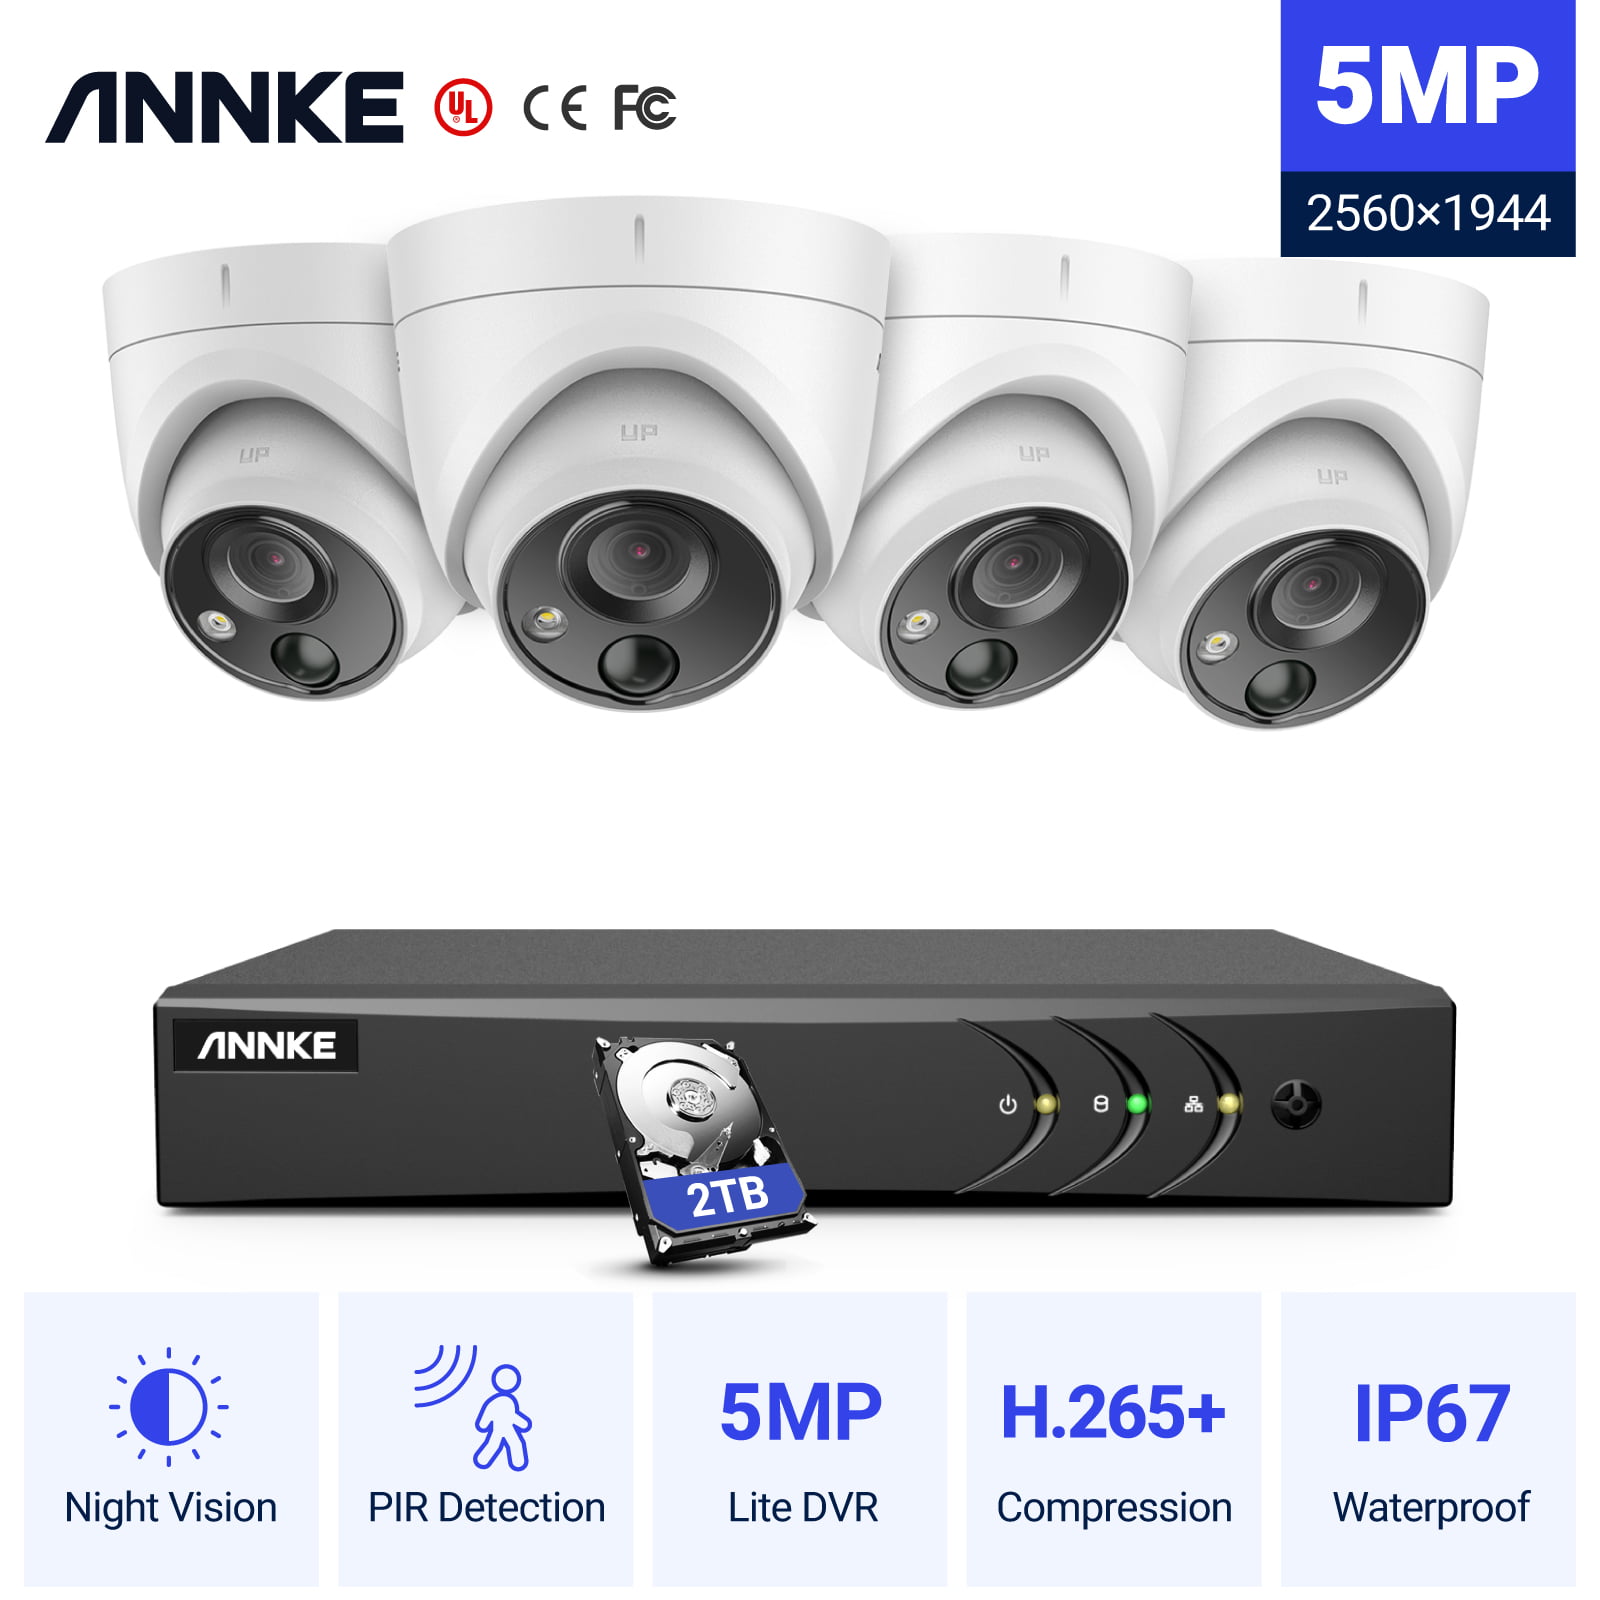 ANNKE CCTV Camera System 2TB HDD and 4X 5MP Outdoor Security Dome IP Night Vision 